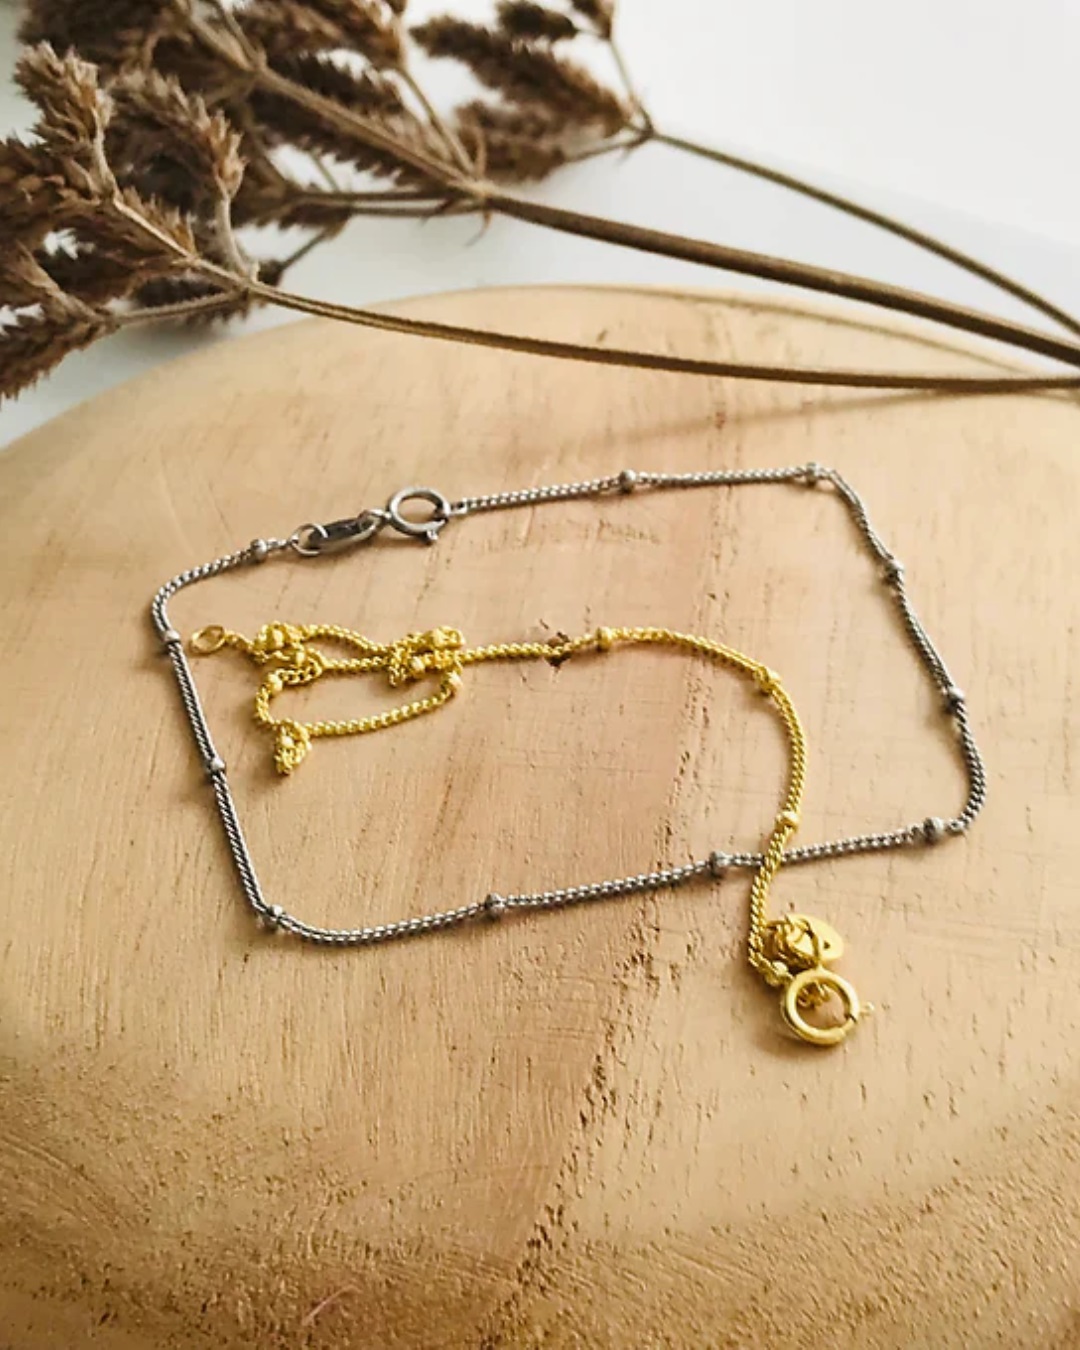 Fine gold and silver chain bracelet on wooden board